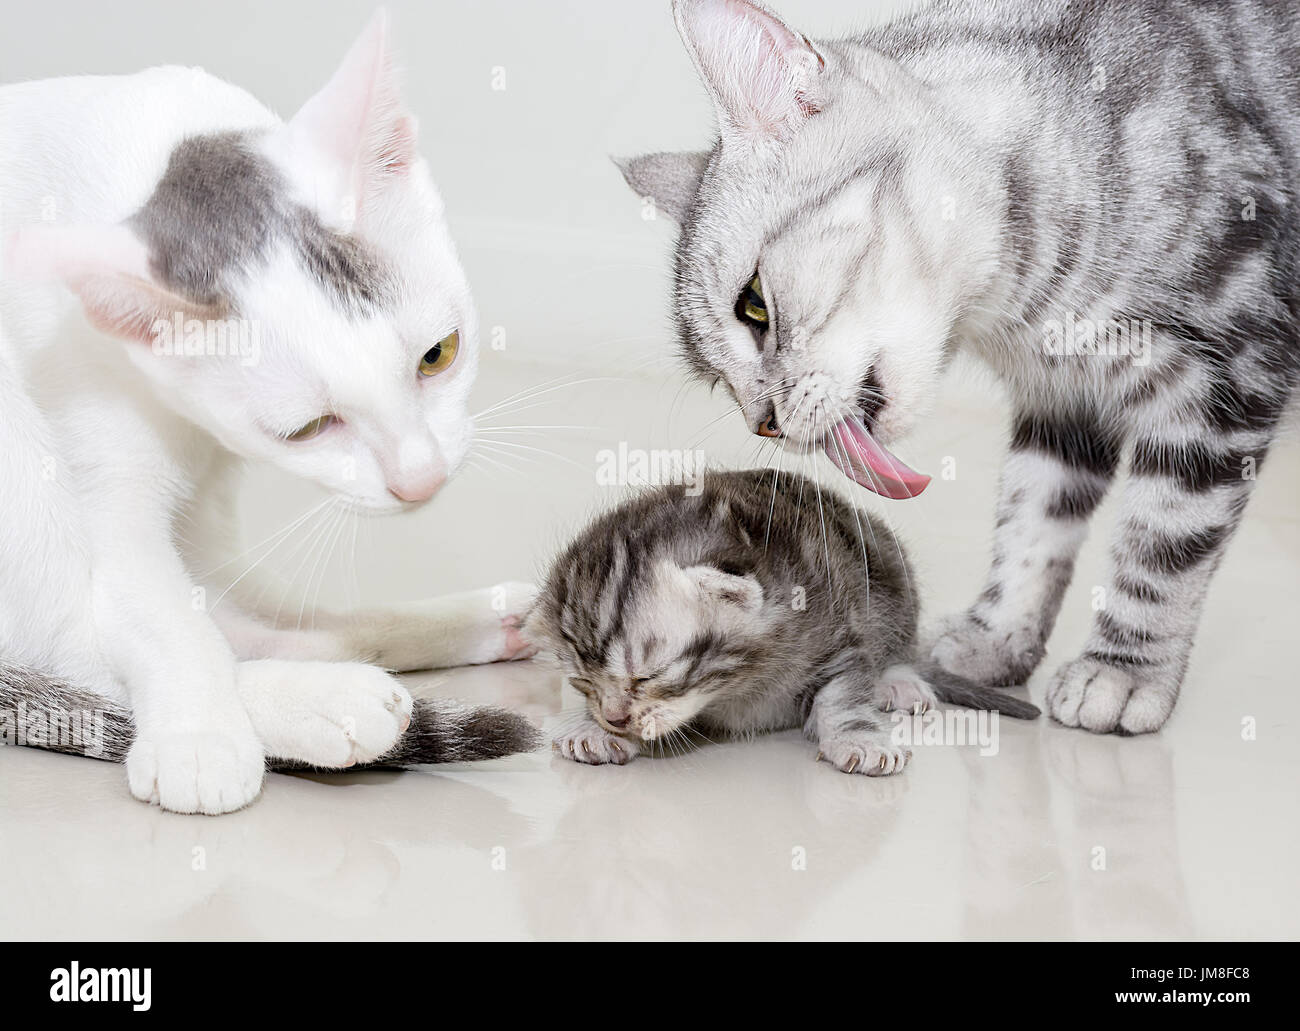 The adult cat licks a small kitten Stock Photo